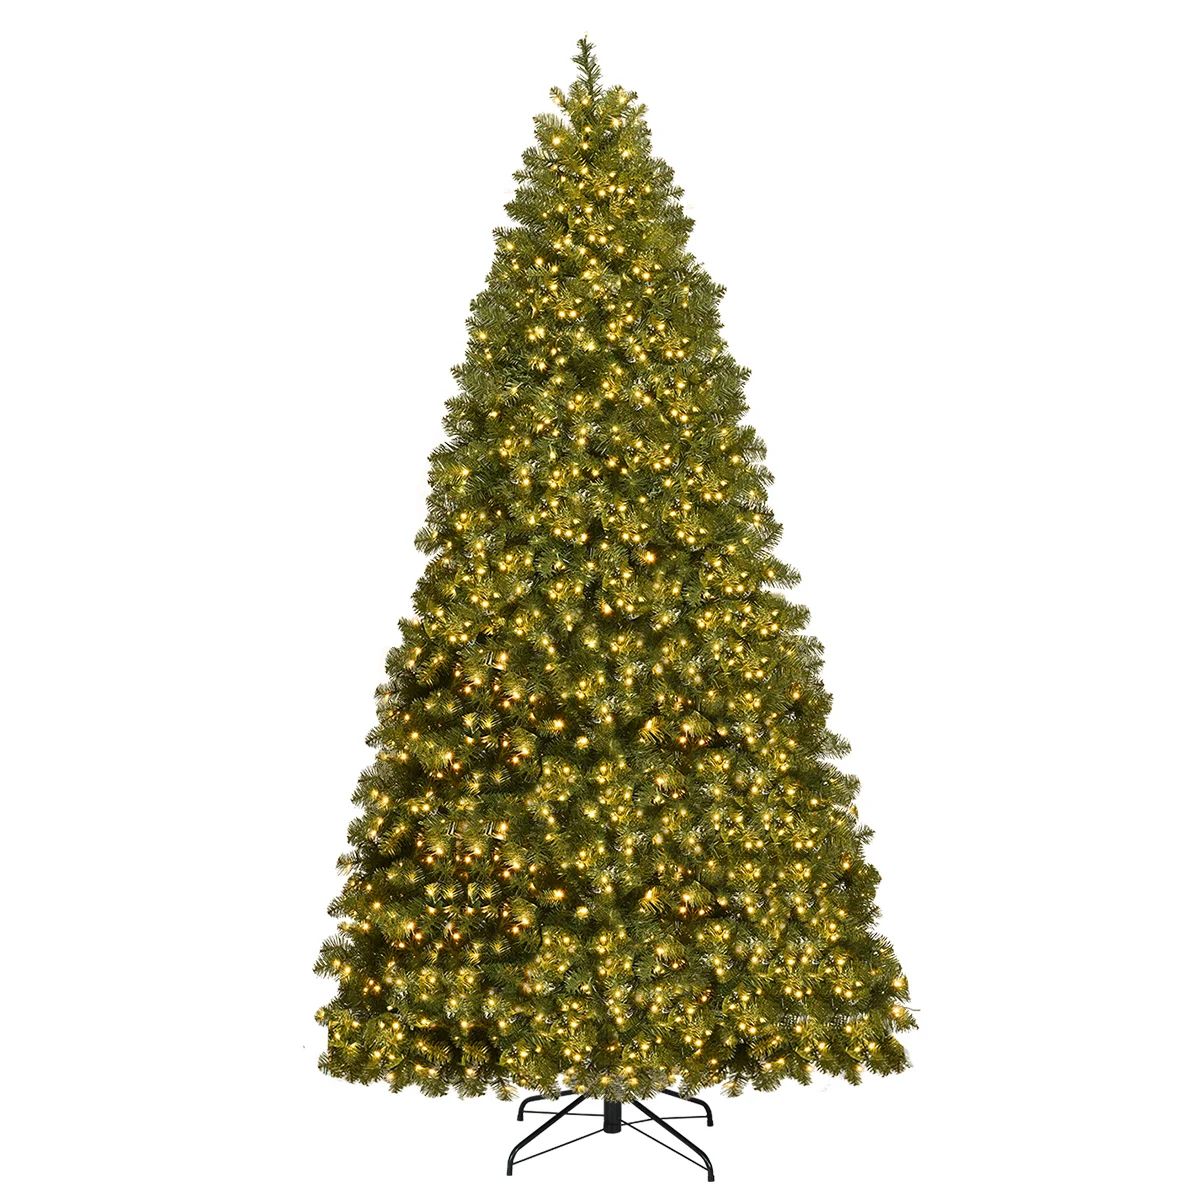 Green Pine Artificial Christmas Tree with Multi-Colored Lights | Wayfair North America